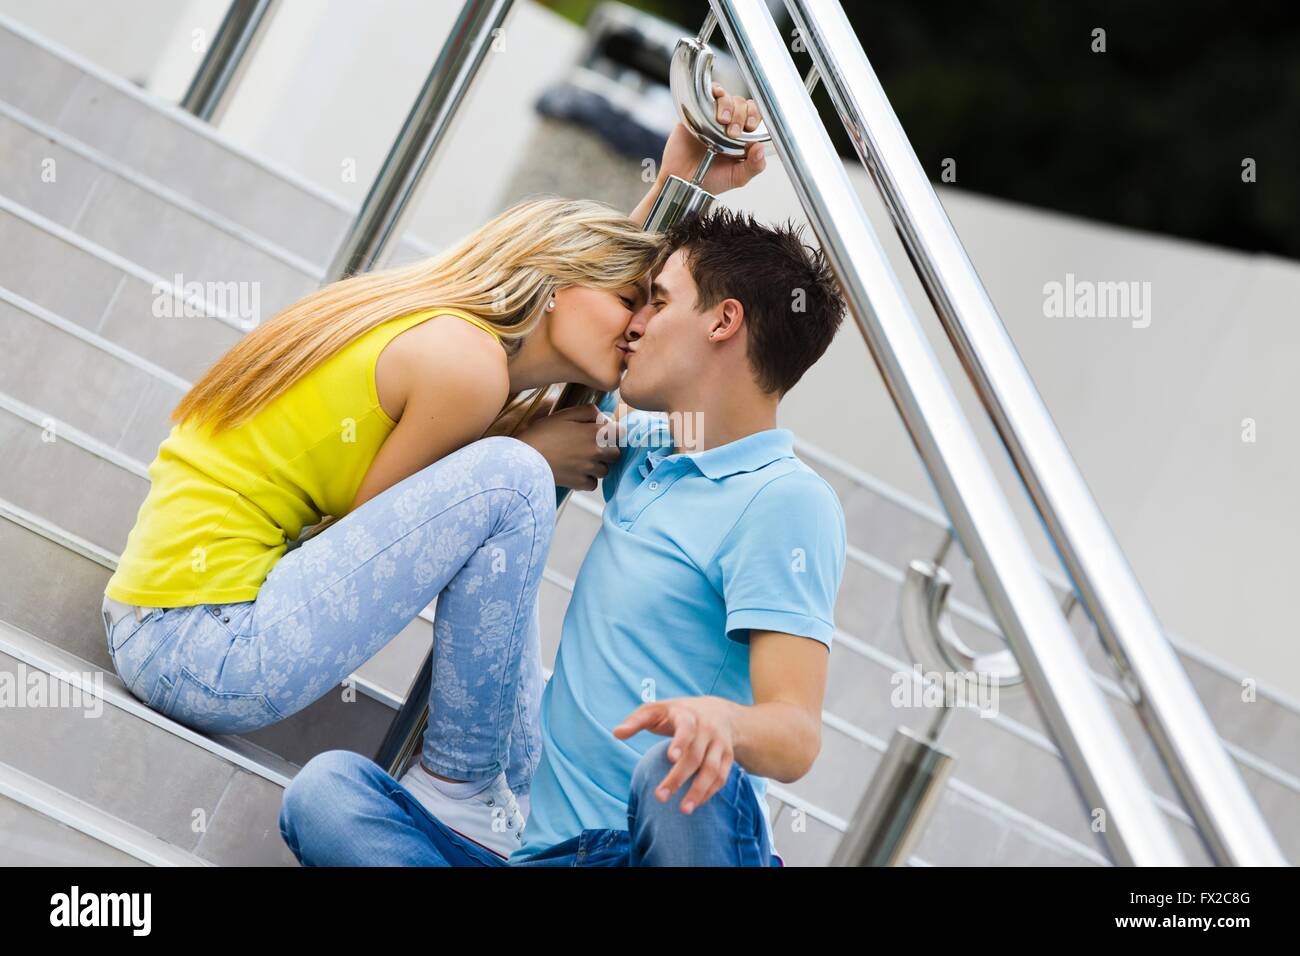 How To Kiss Kissing Teens 76